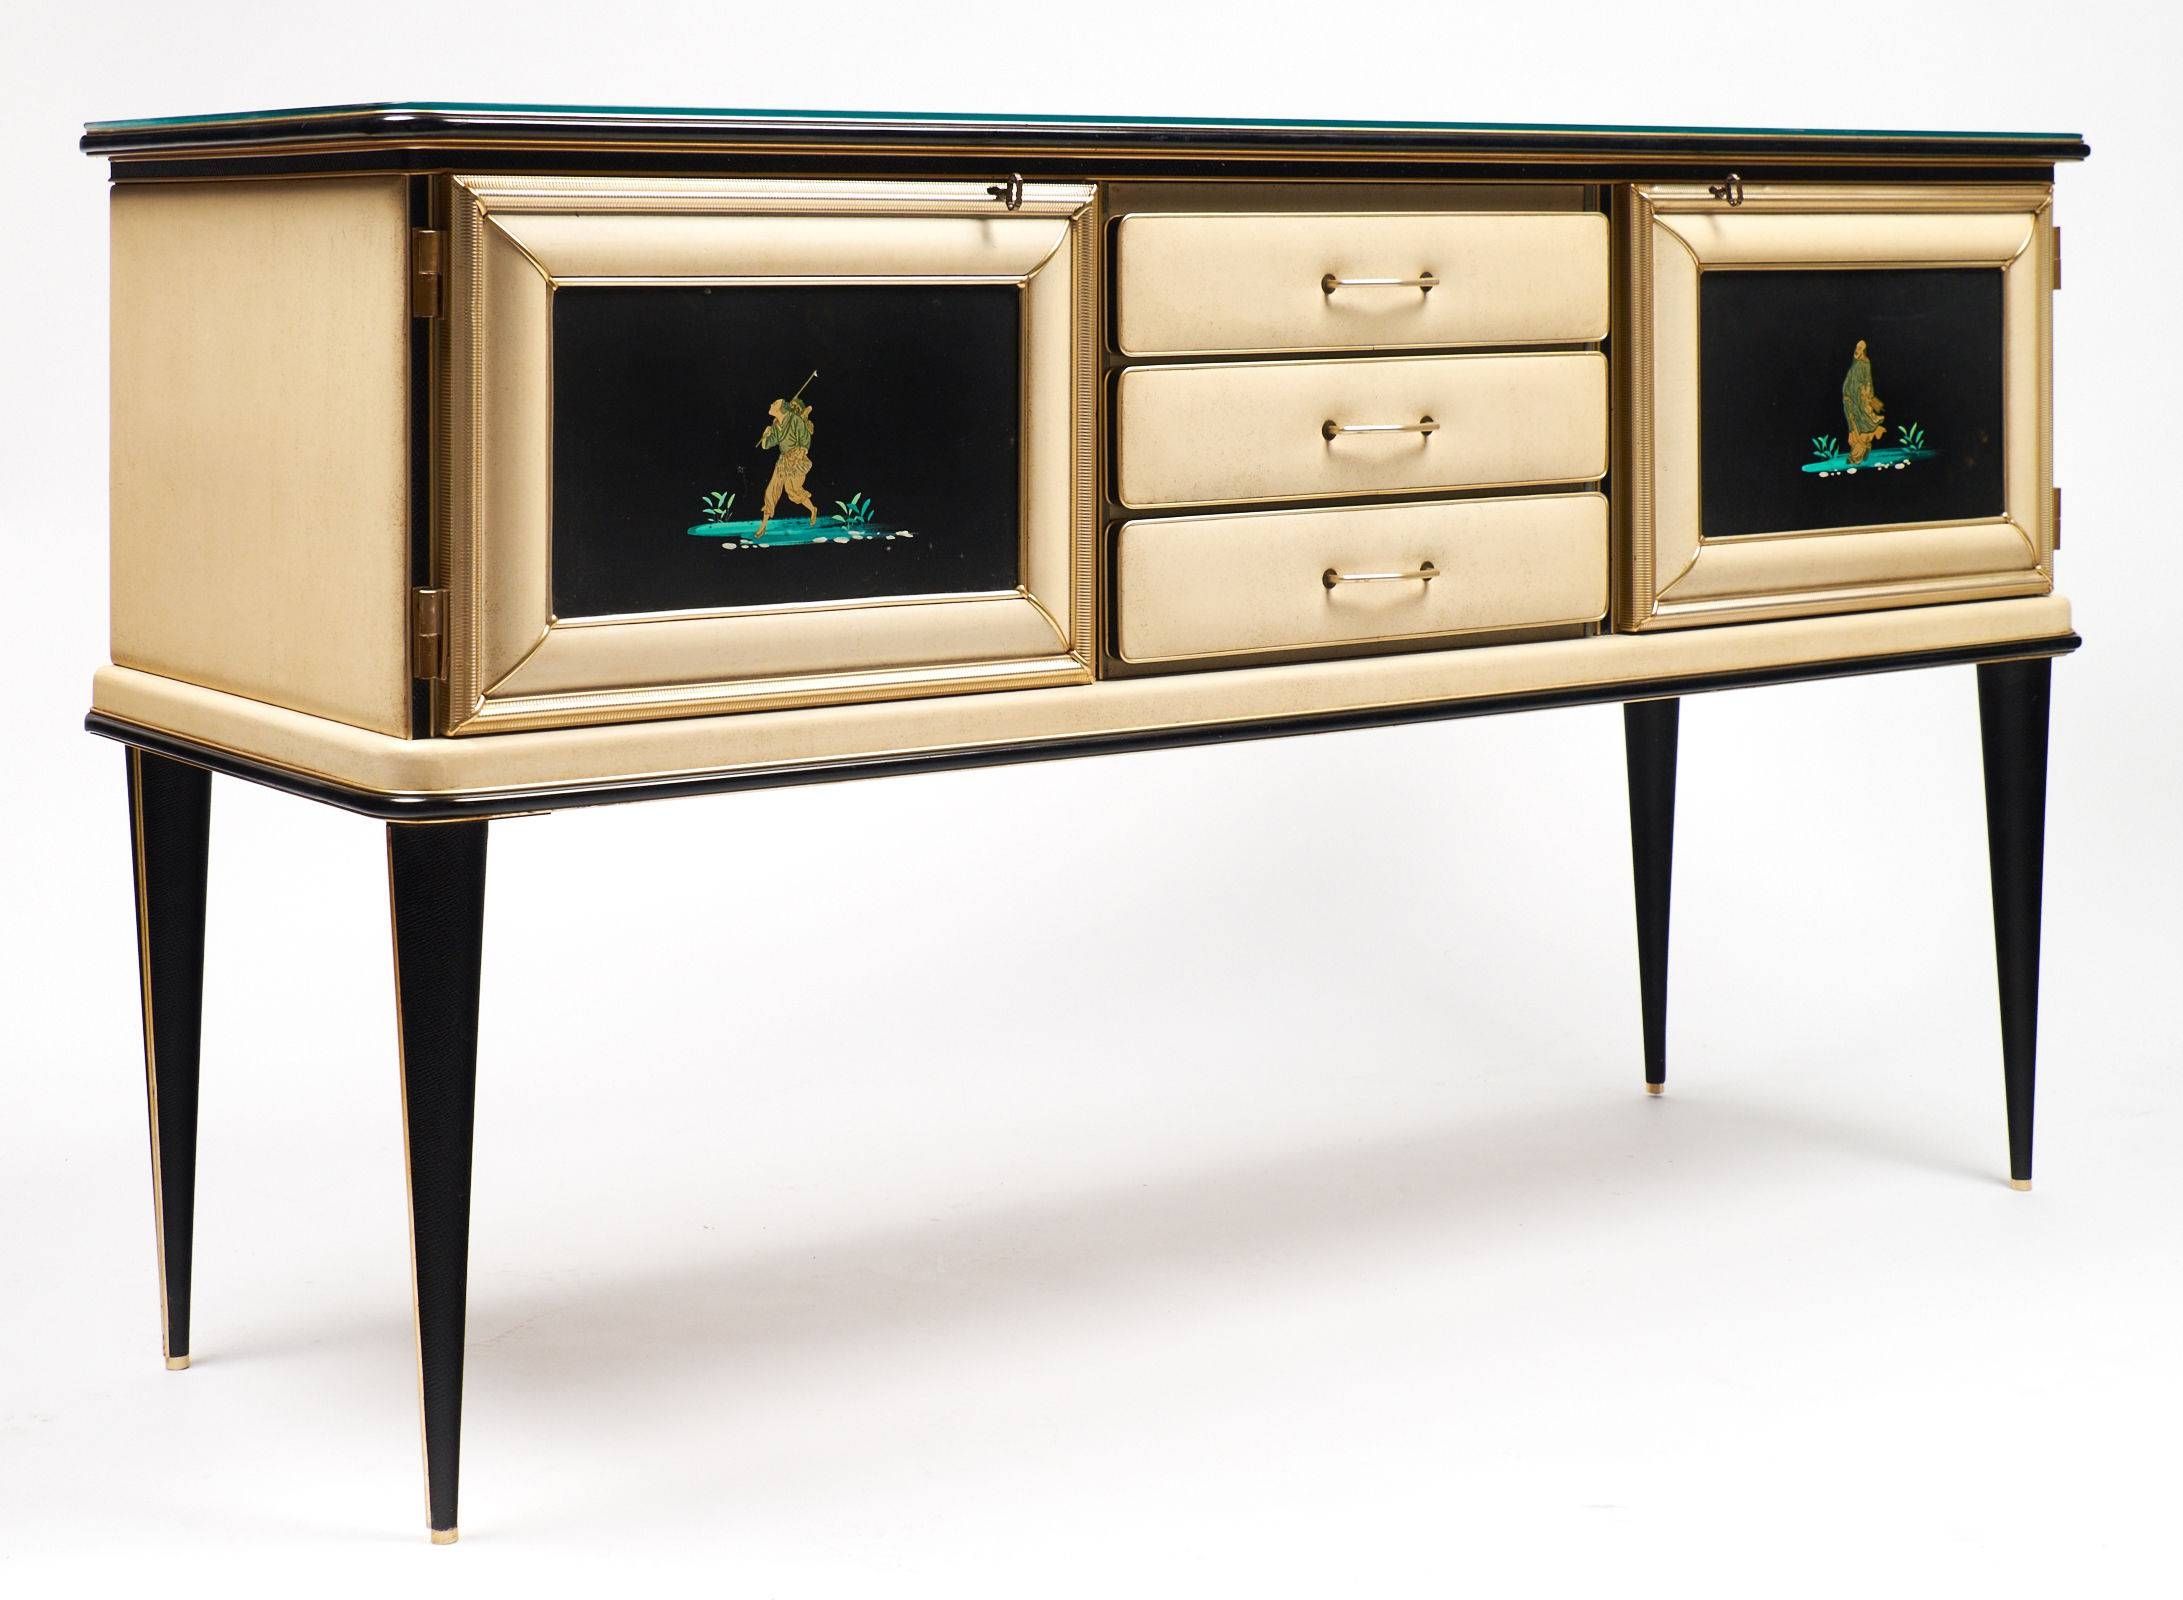 Vintage Umberto Mascagni Chinoiserie Sideboard – Jean Marc Fray With Regard To Chinoiserie Sideboard (View 11 of 20)